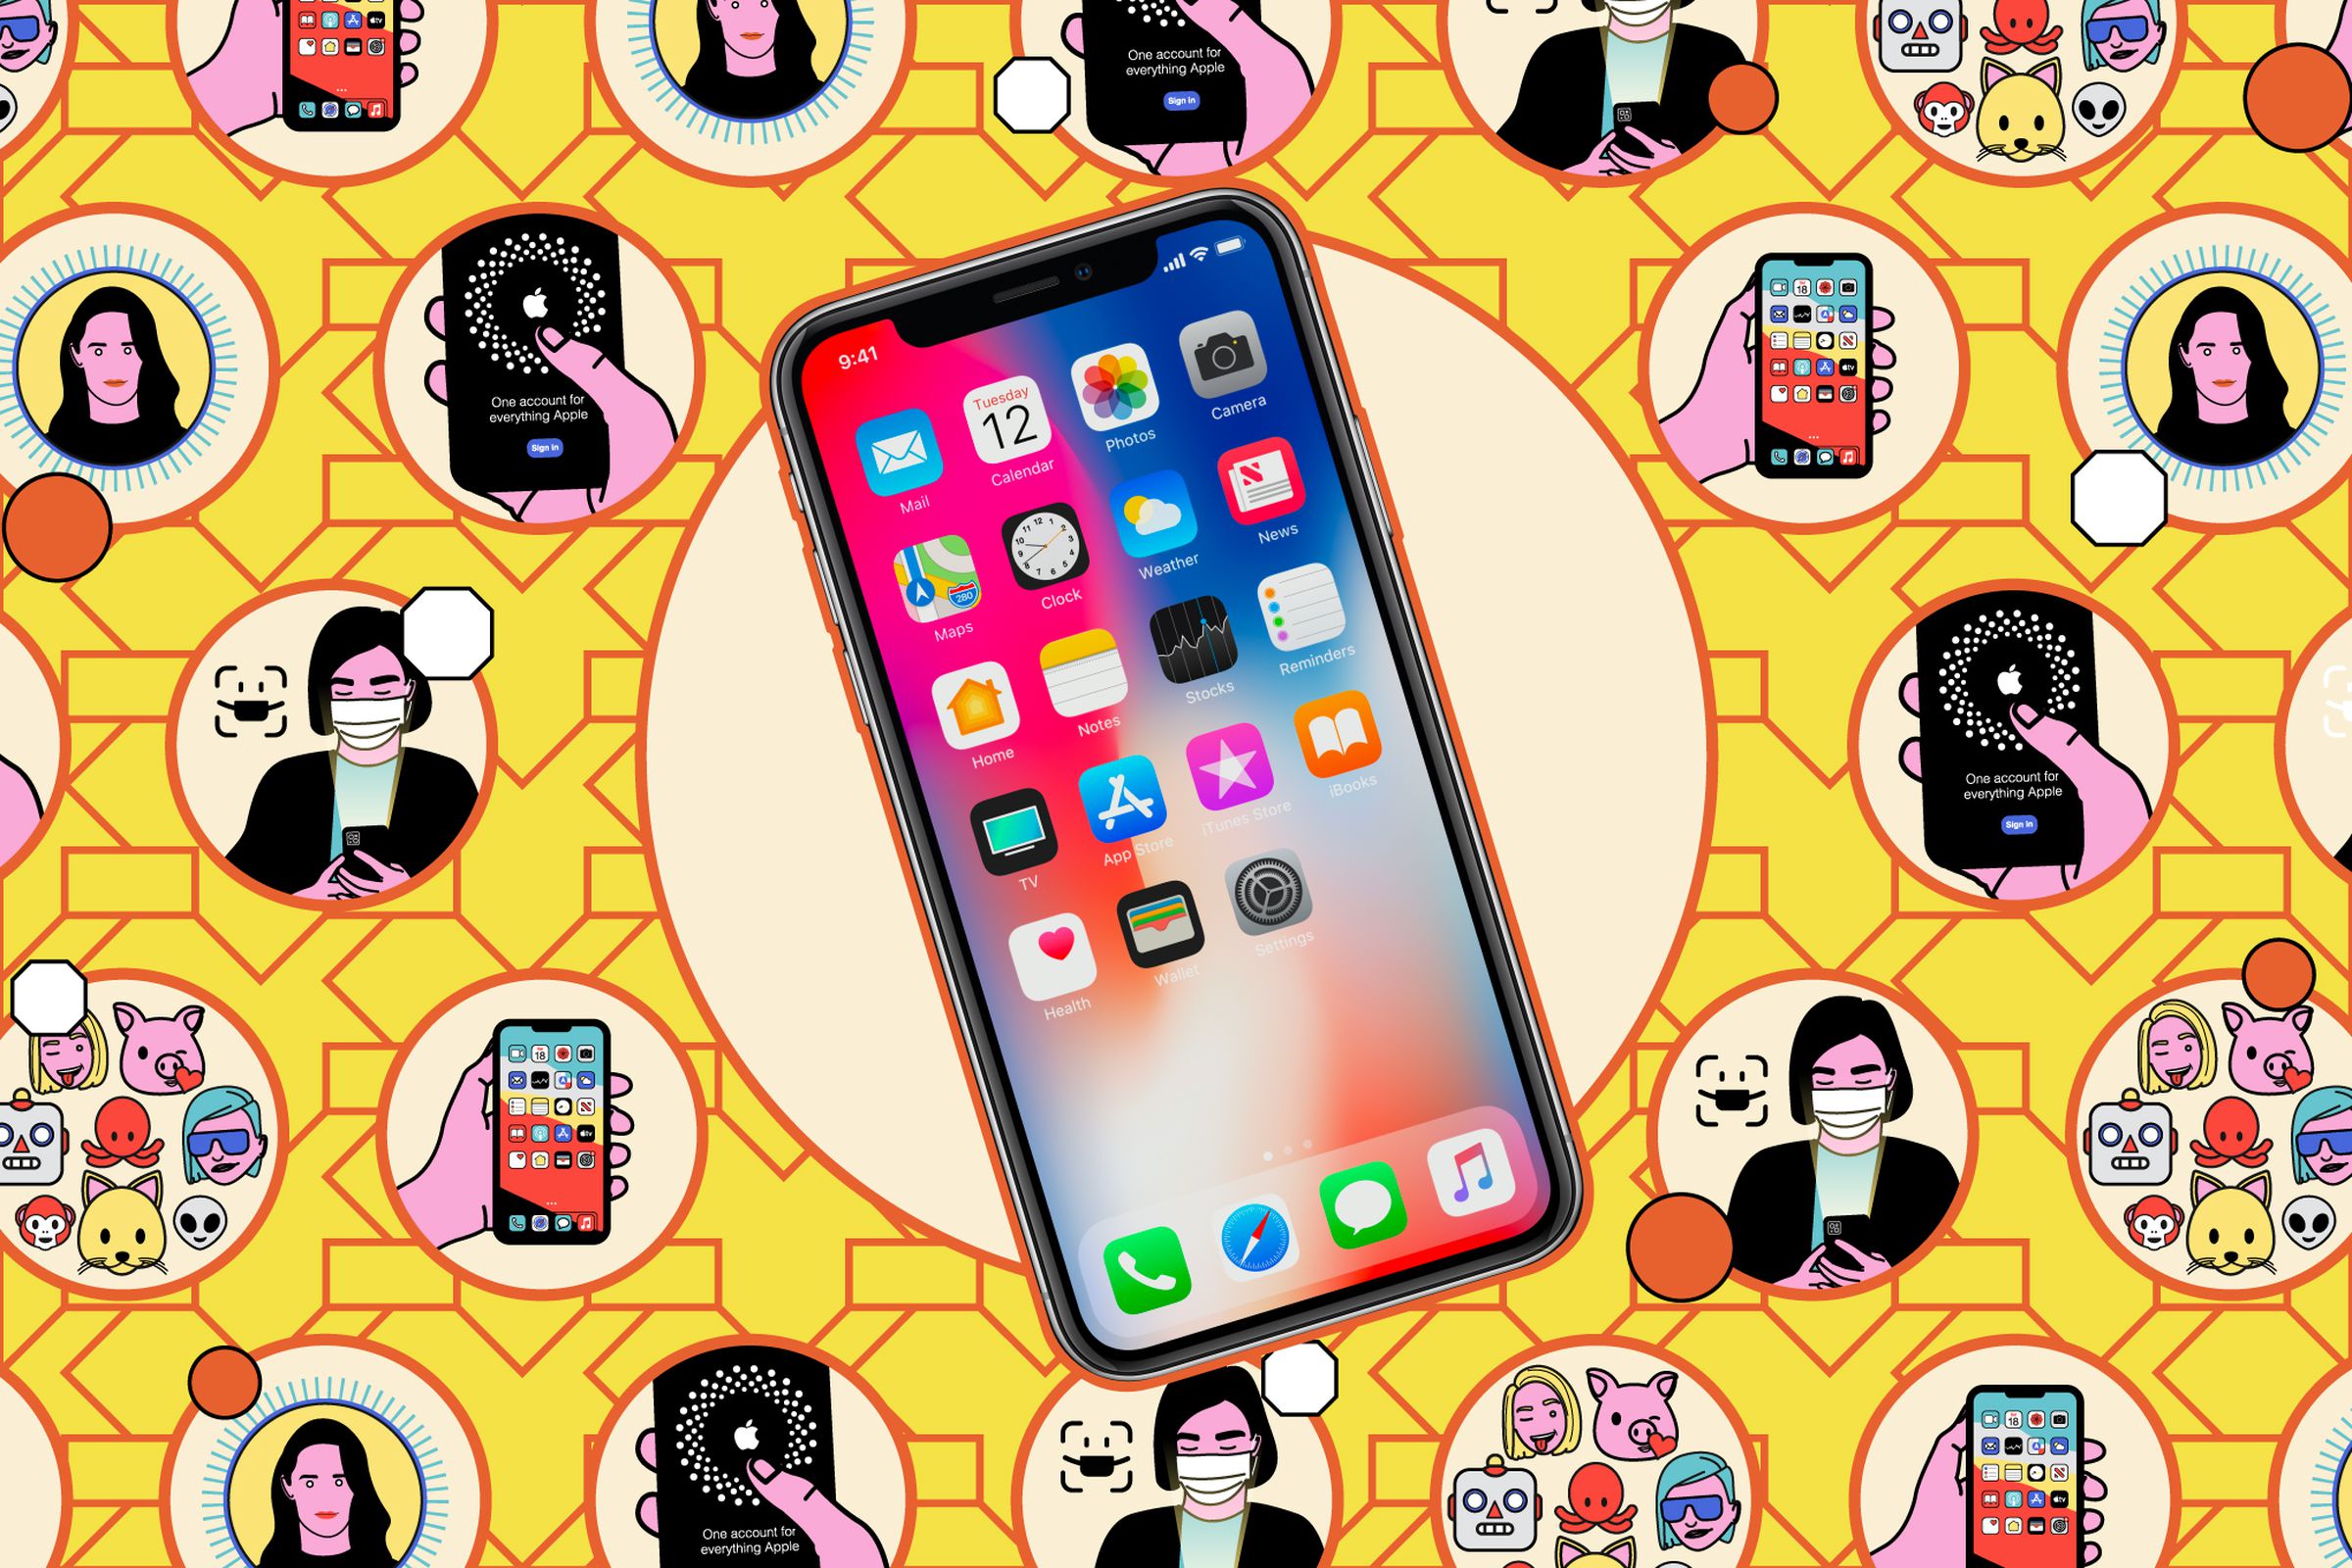 iPhone on a colorful illustrated background showing people using iPhones